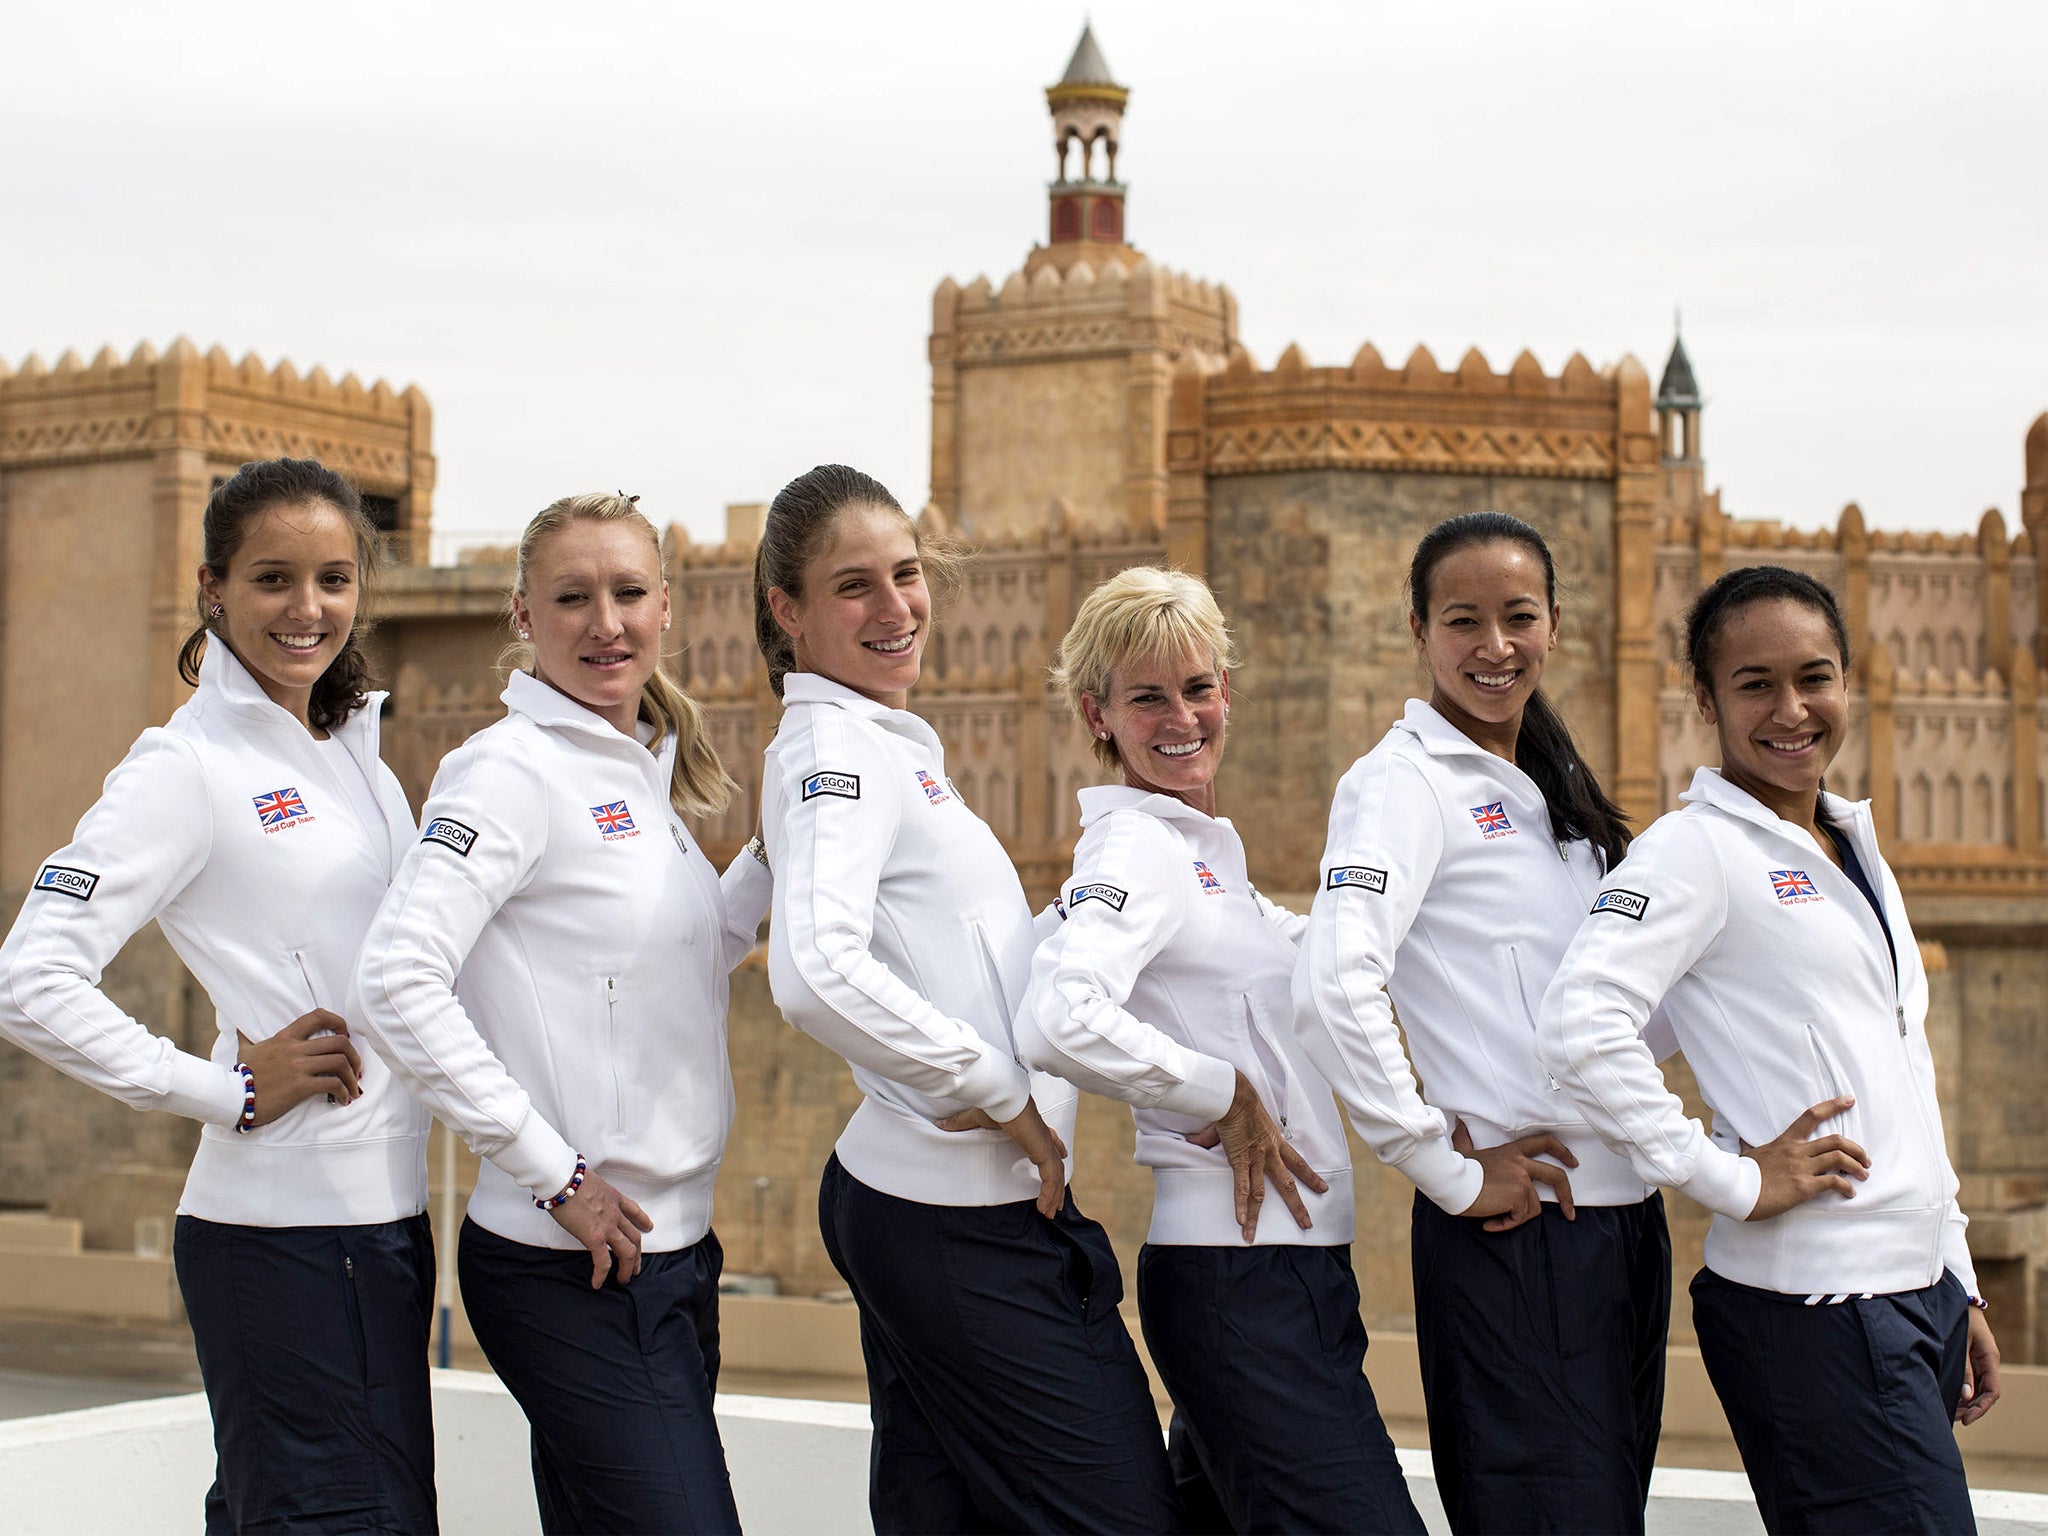 (From left) Laura Robson, Elena Baltacha, Johanna Konta, Judy Murray, Anne Keothavong and Heather Watson are in Israel as Britain try to qualify for the Fed Cup world group for the first time in 20 years